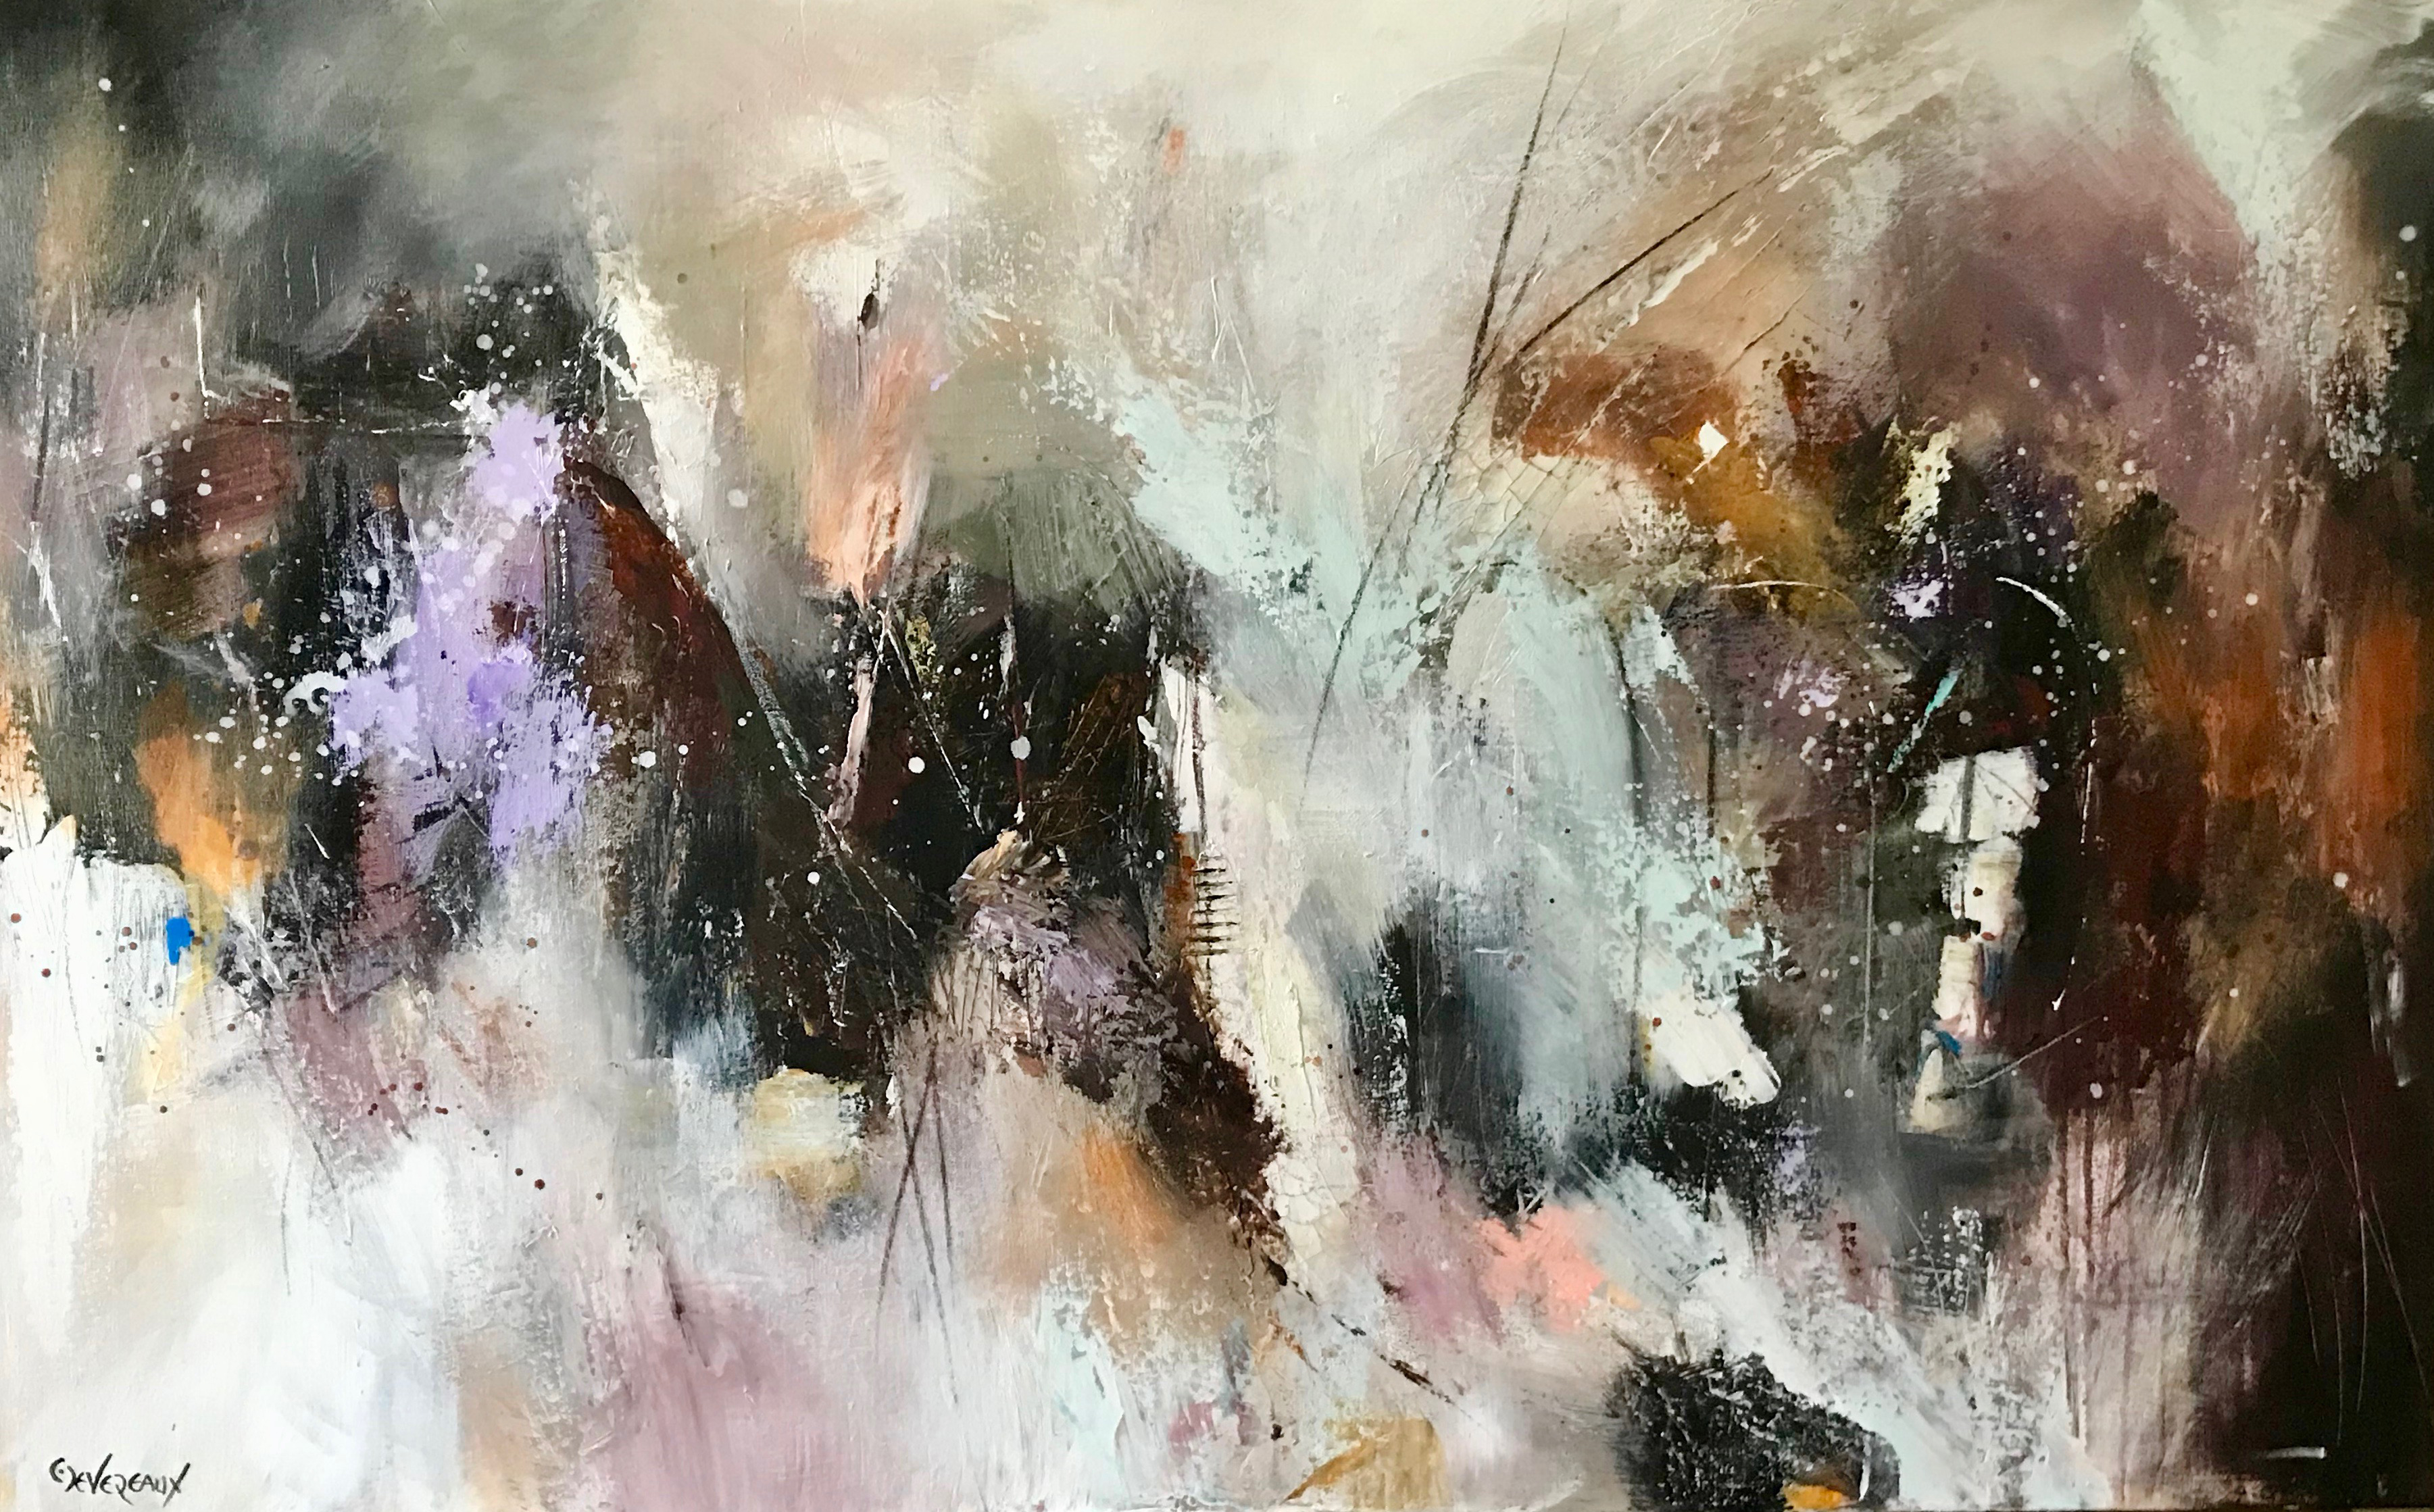 'Dance In the River' 30x48 in  contemporary modern contemporary abstract painting by Cher Devereaux on stretched canvas.